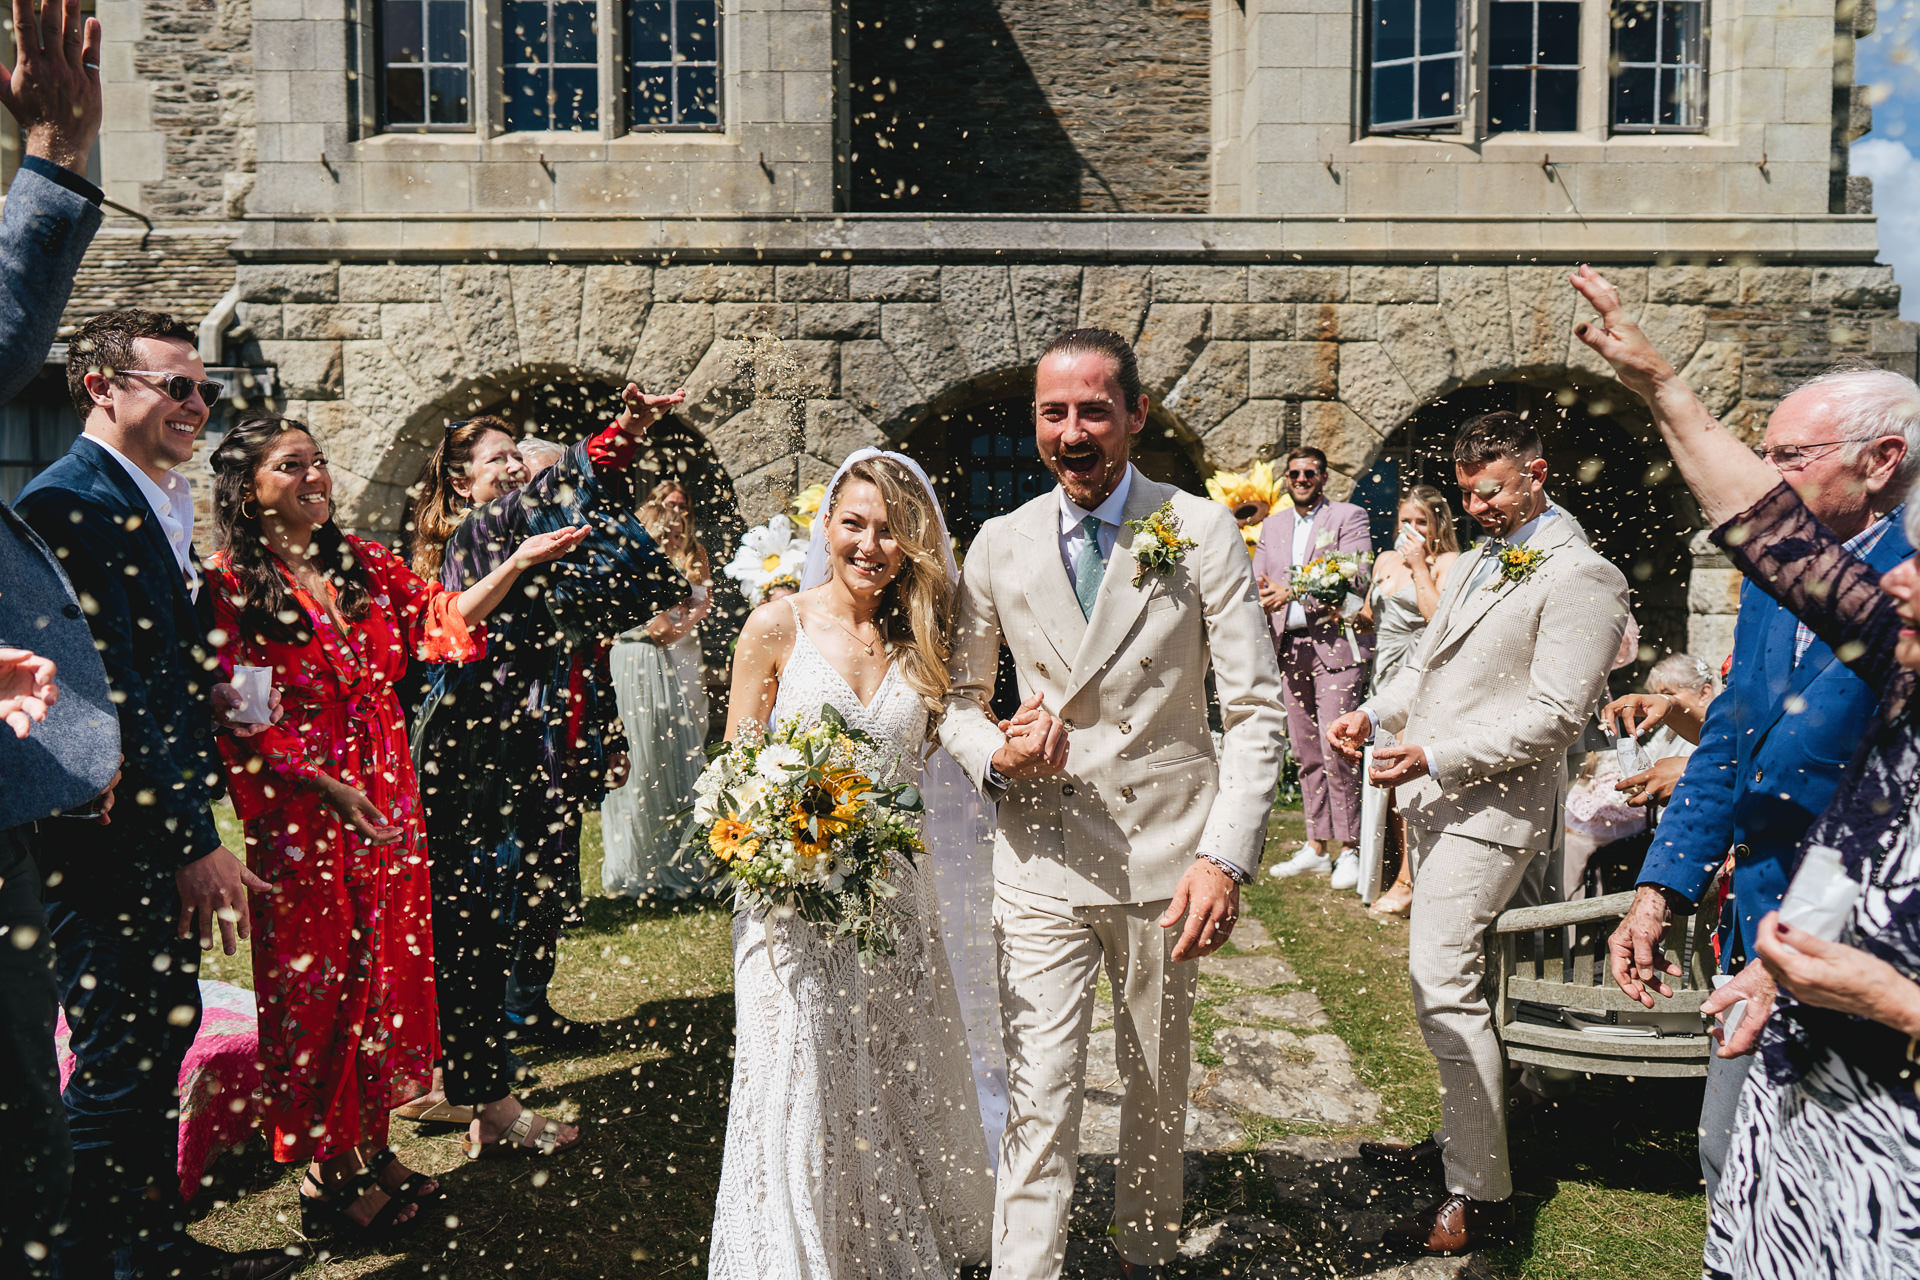 Bride and groom smiling and walking through confetti with wedding guests smiling around them